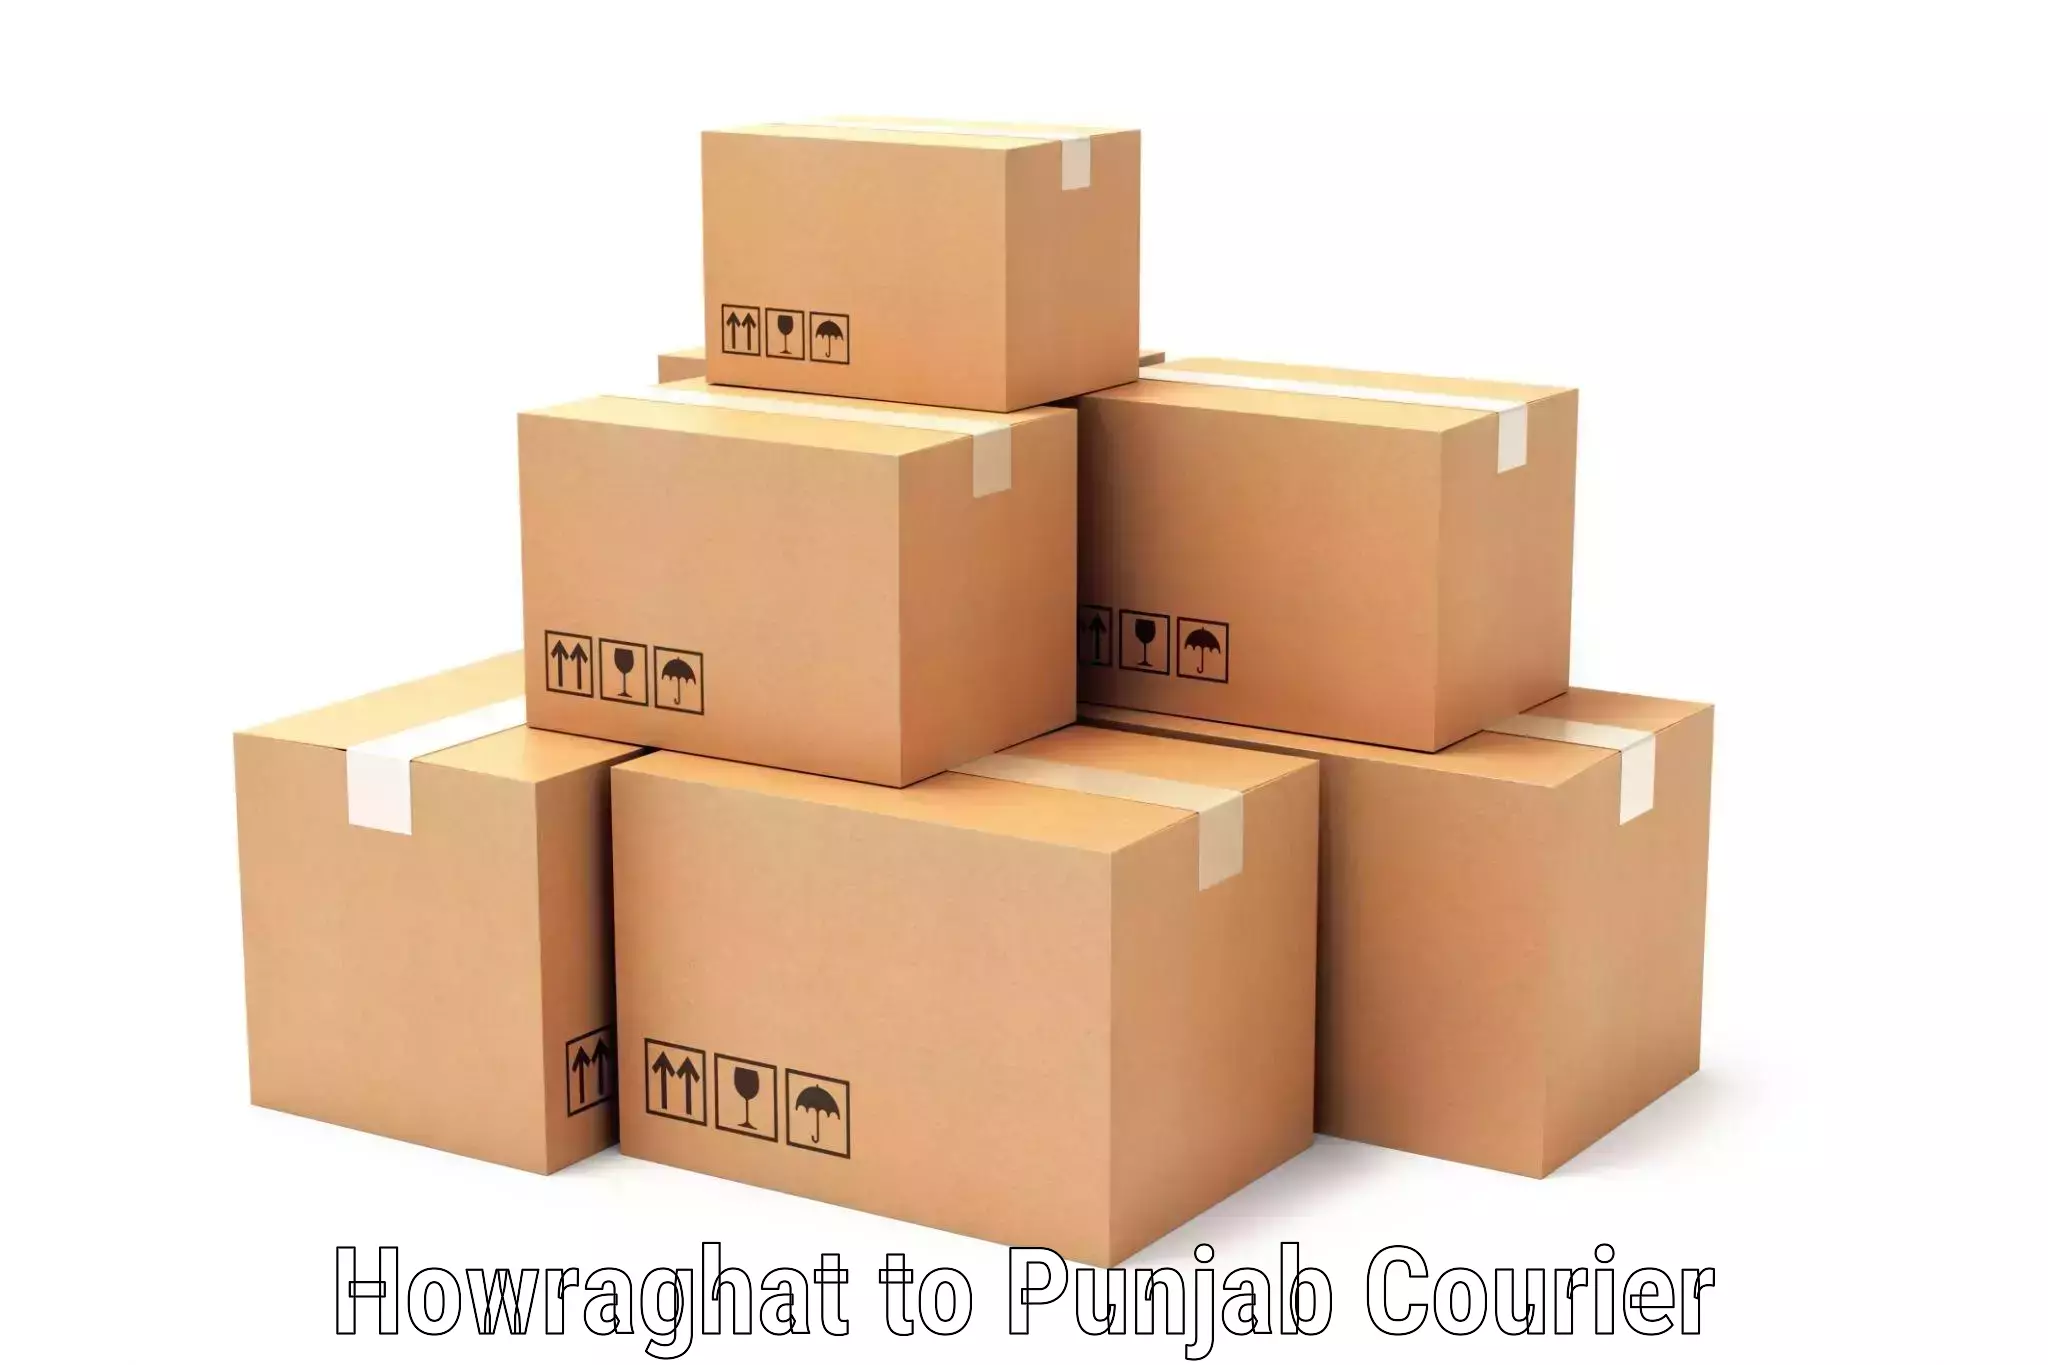 Domestic courier Howraghat to Pathankot